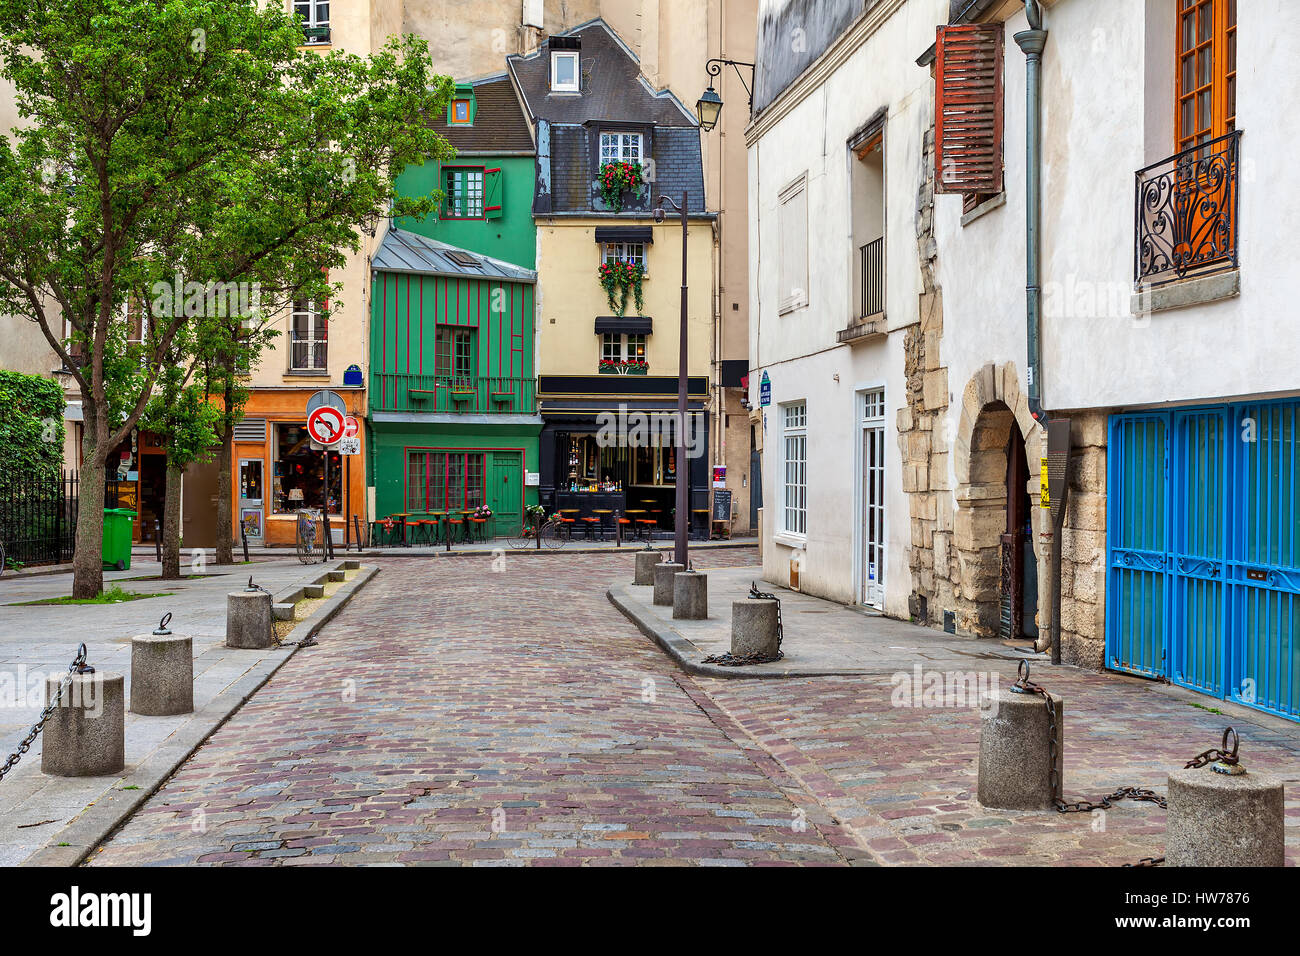 View of narrow cobblestone street and typical parisian architecture in Paris, France. Stock Photo